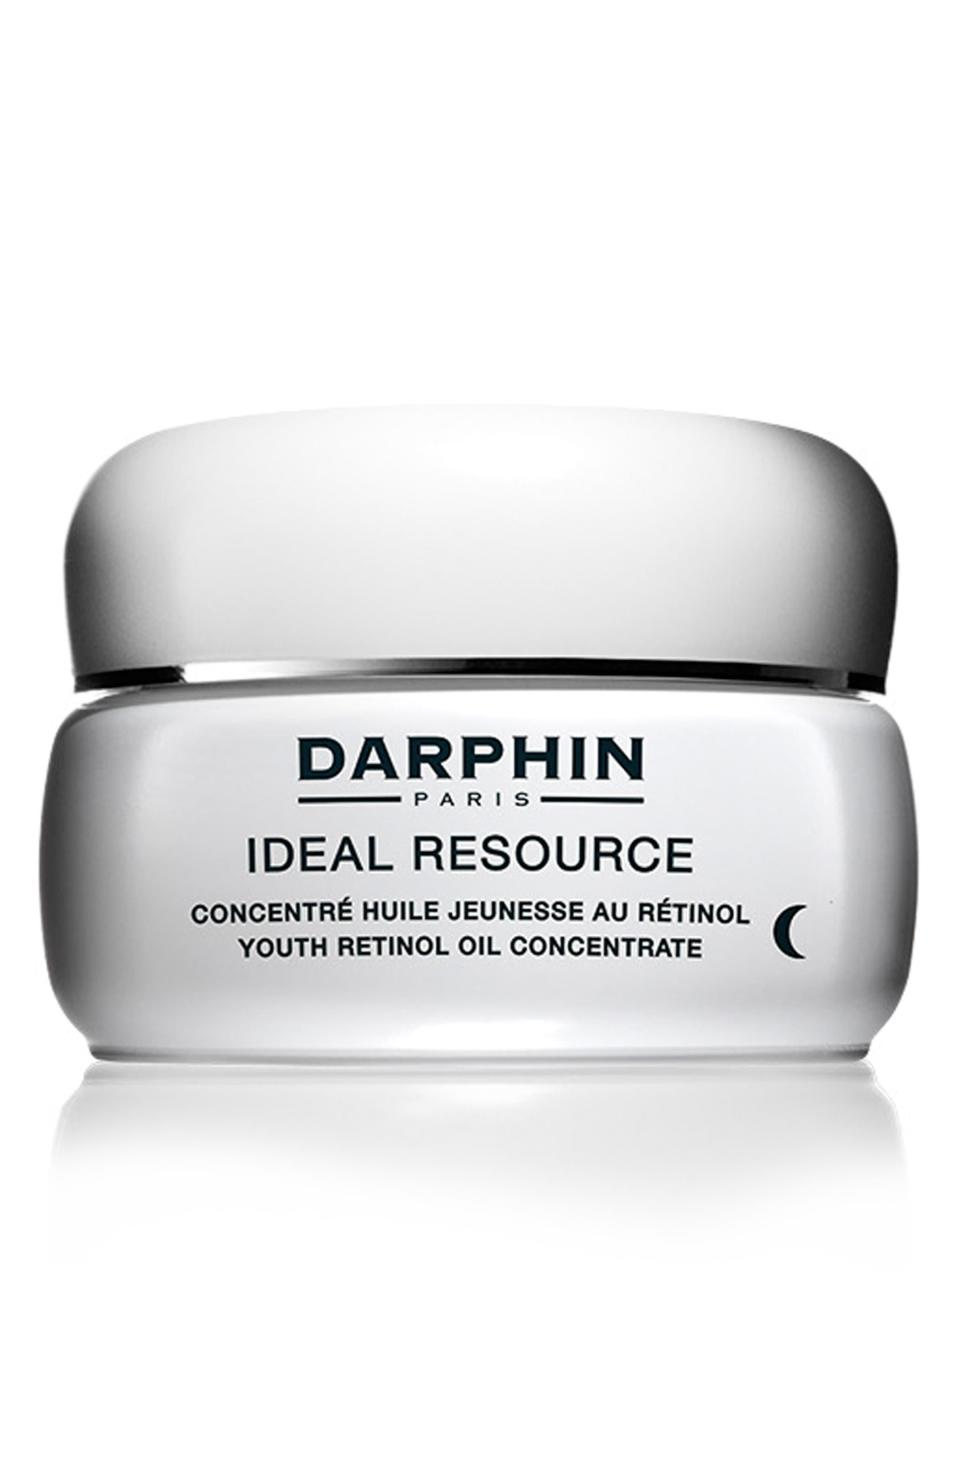 <p><strong>Darphin</strong></p><p>nordstrom.com</p><p><strong>$100.00</strong></p><p>Packaged in single-use capsules, this blend of botanical oils and retinol can be used alone or mixed into your other skincare.</p>